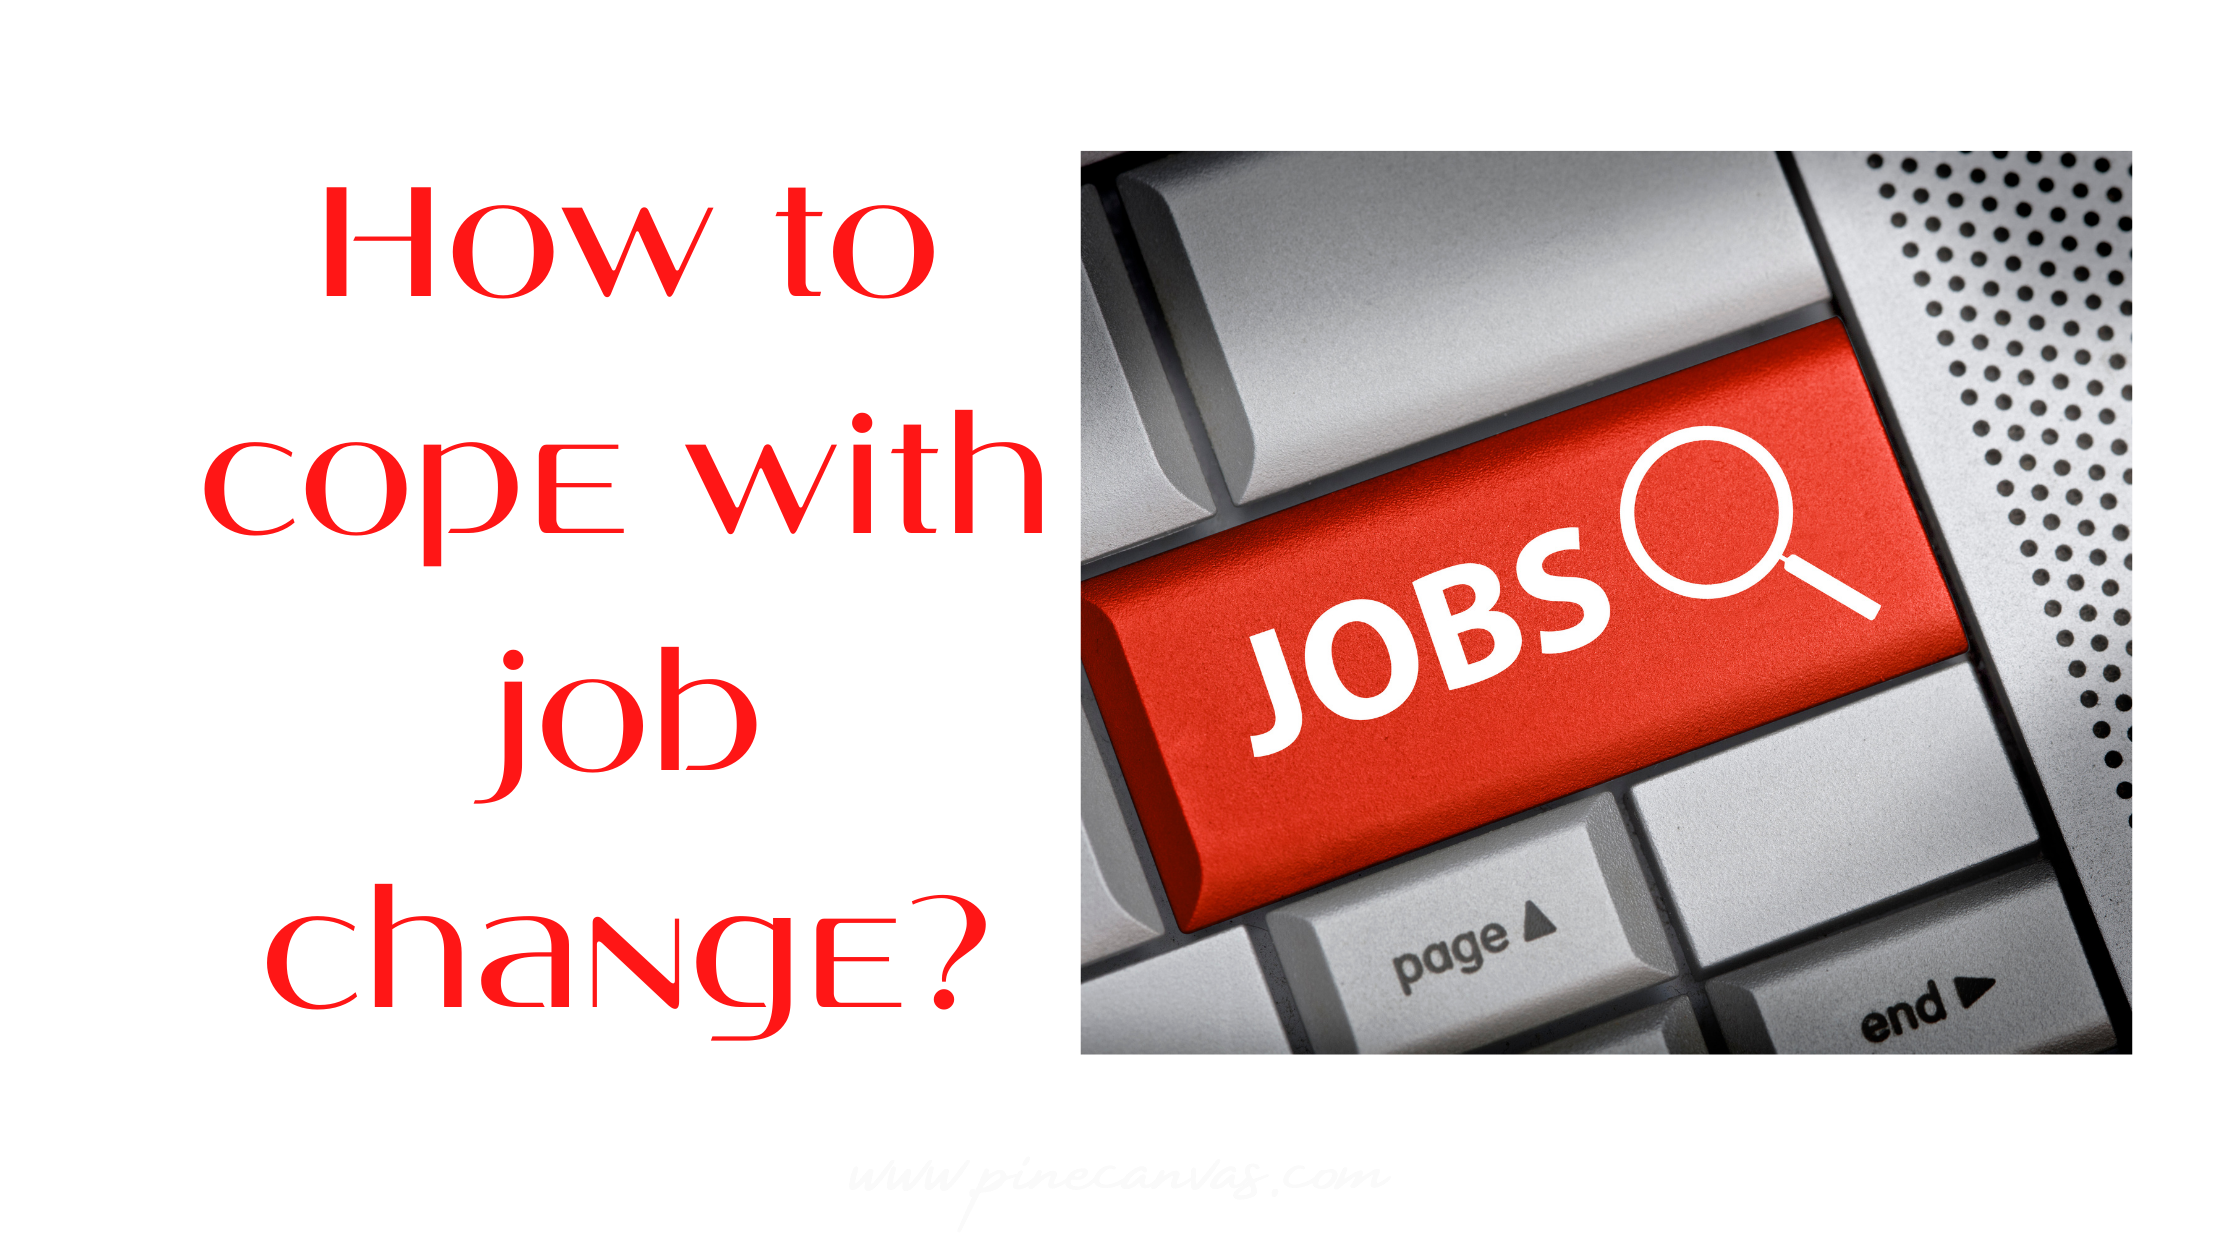 How to cope with job change?